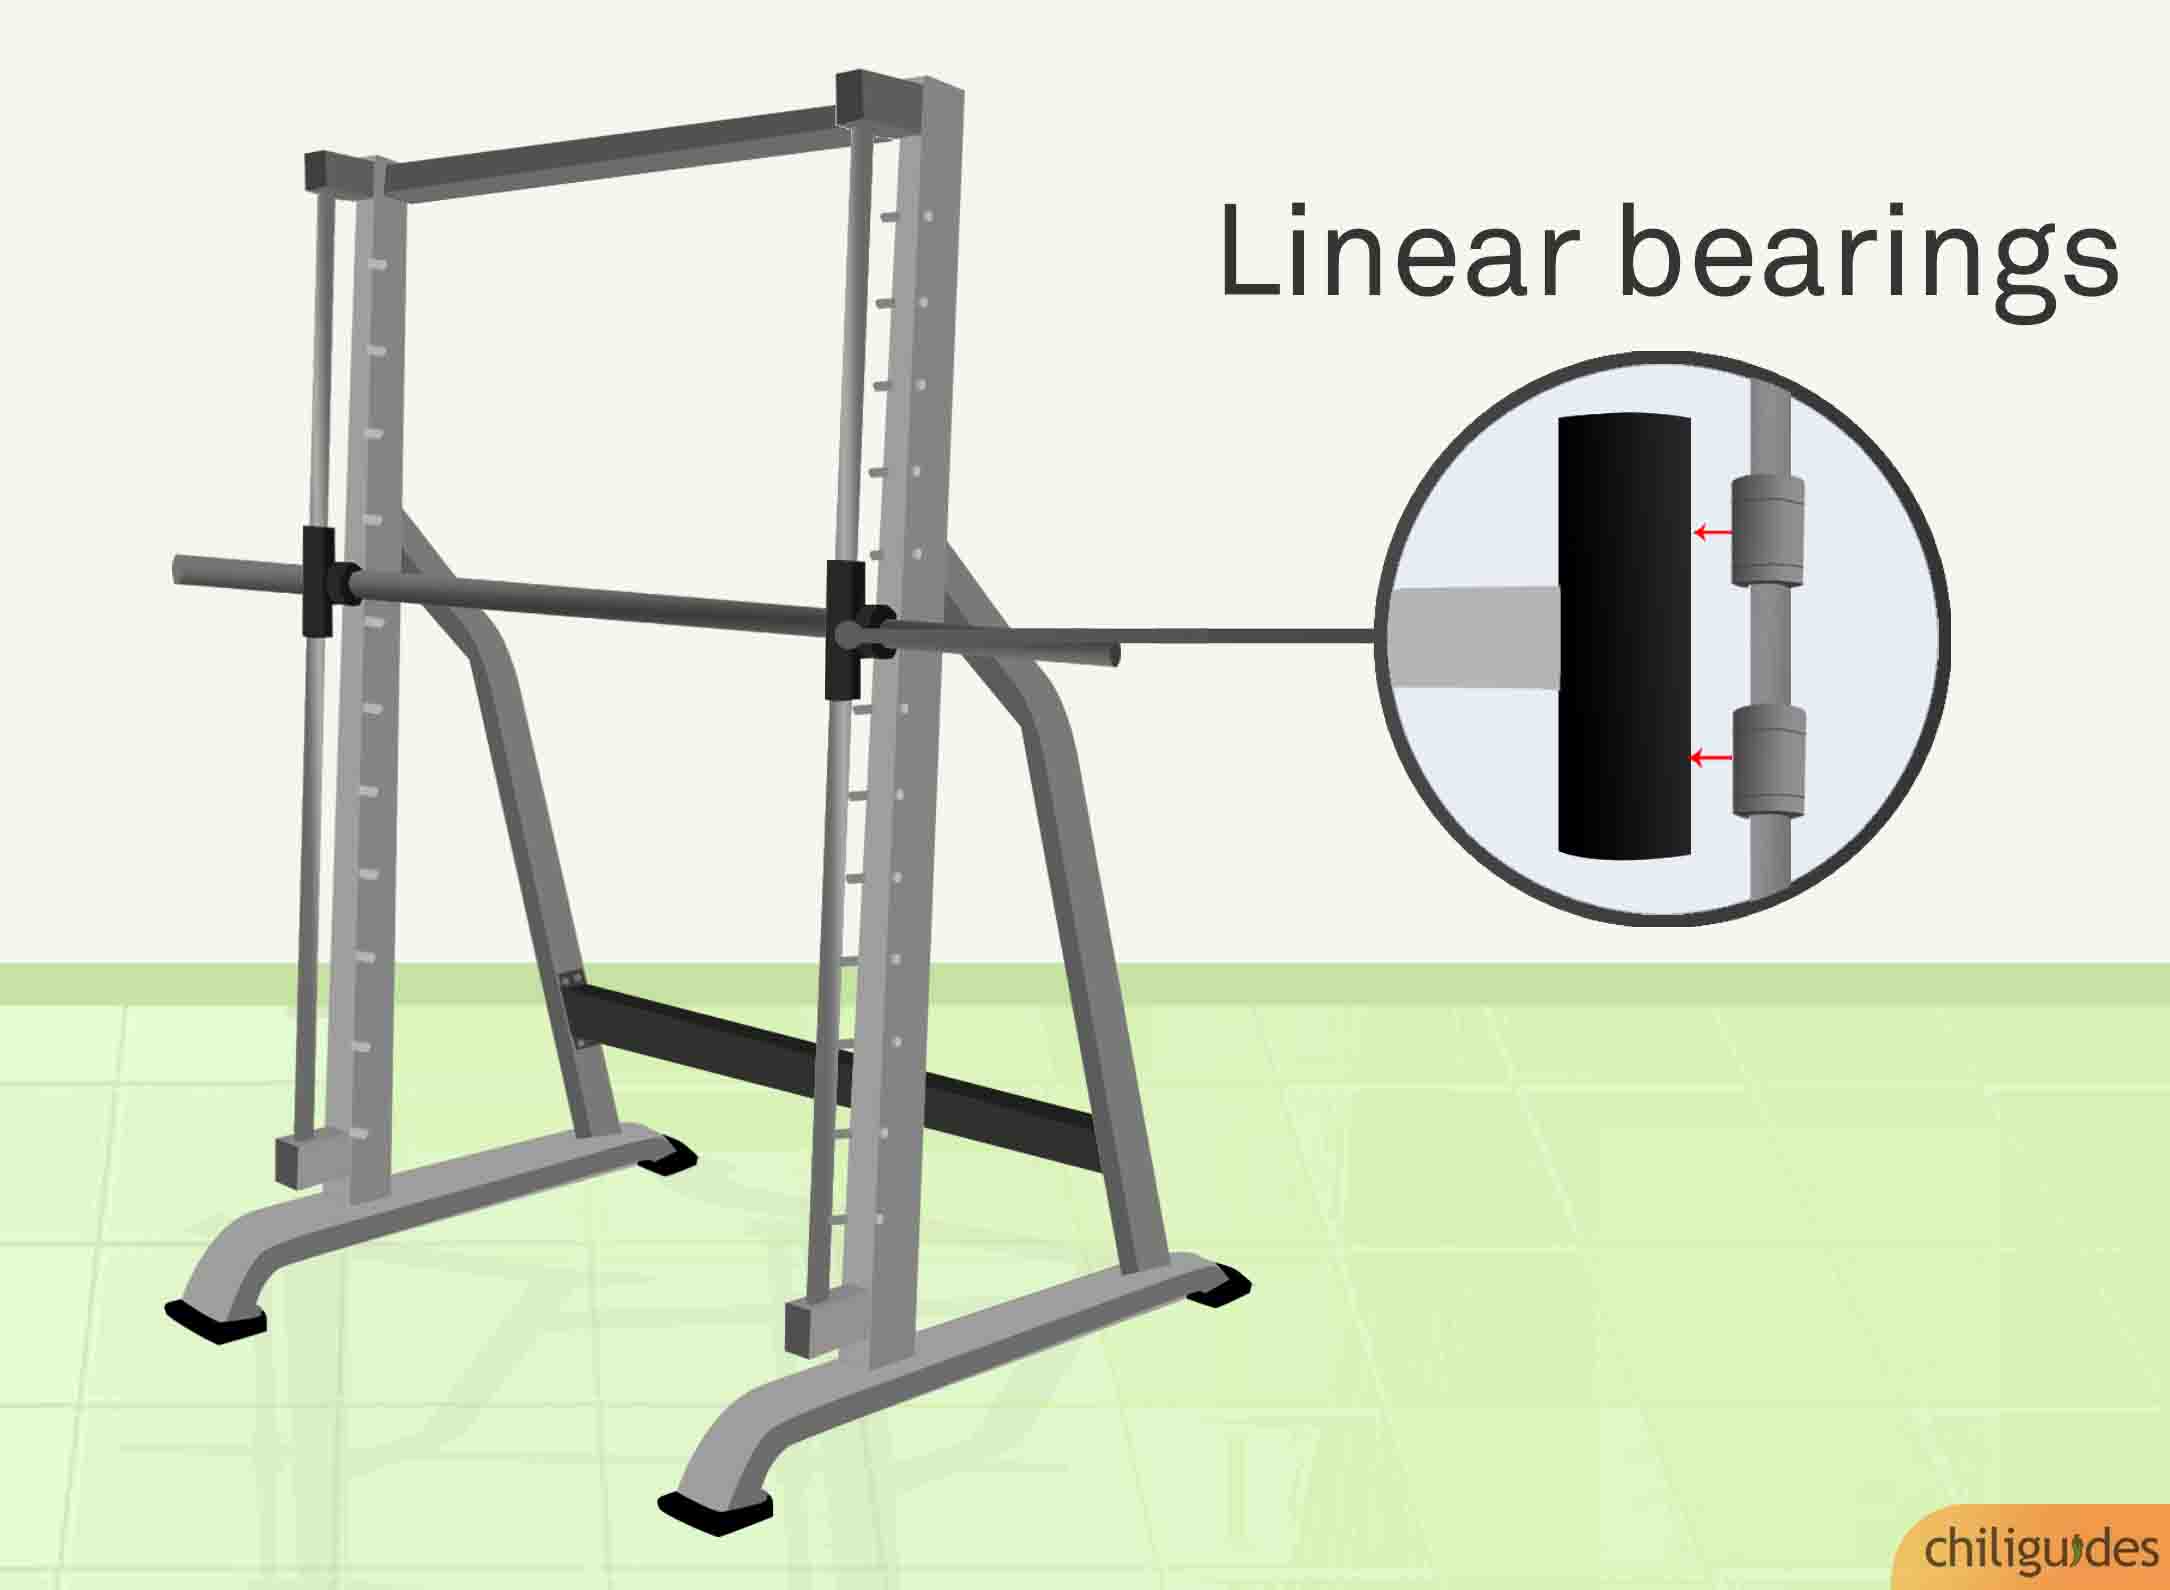 Look for linear bearings for smooth motion of the bar.